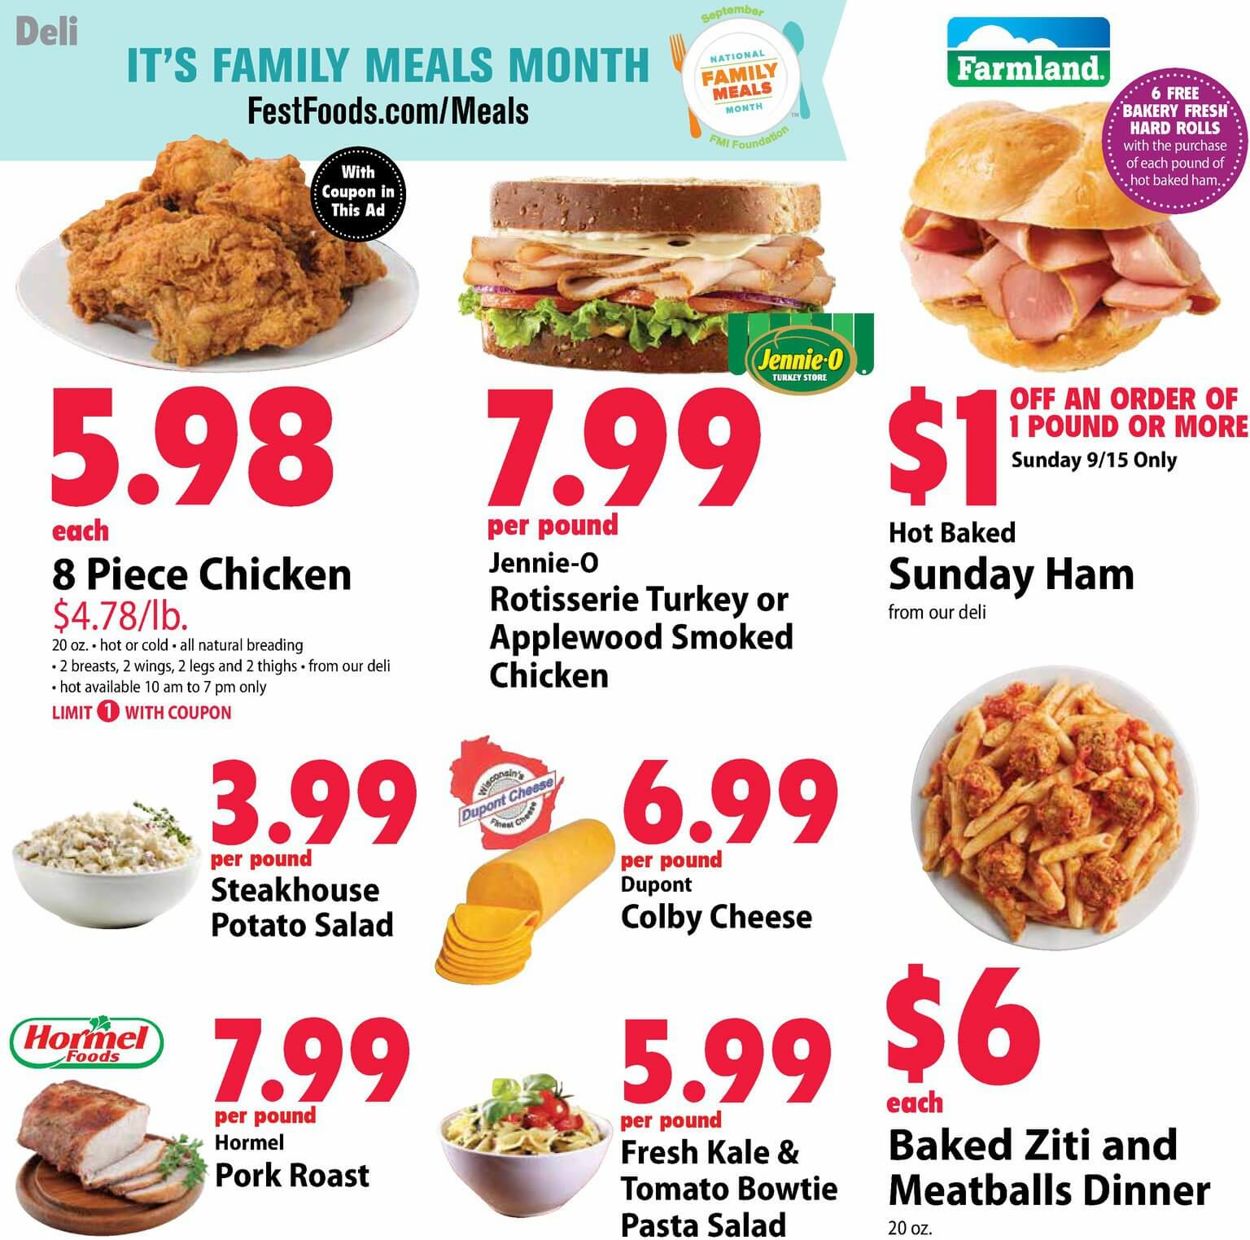 Festival Foods Current weekly ad 09/11 - 09/17/2019 [5] - frequent-ads.com